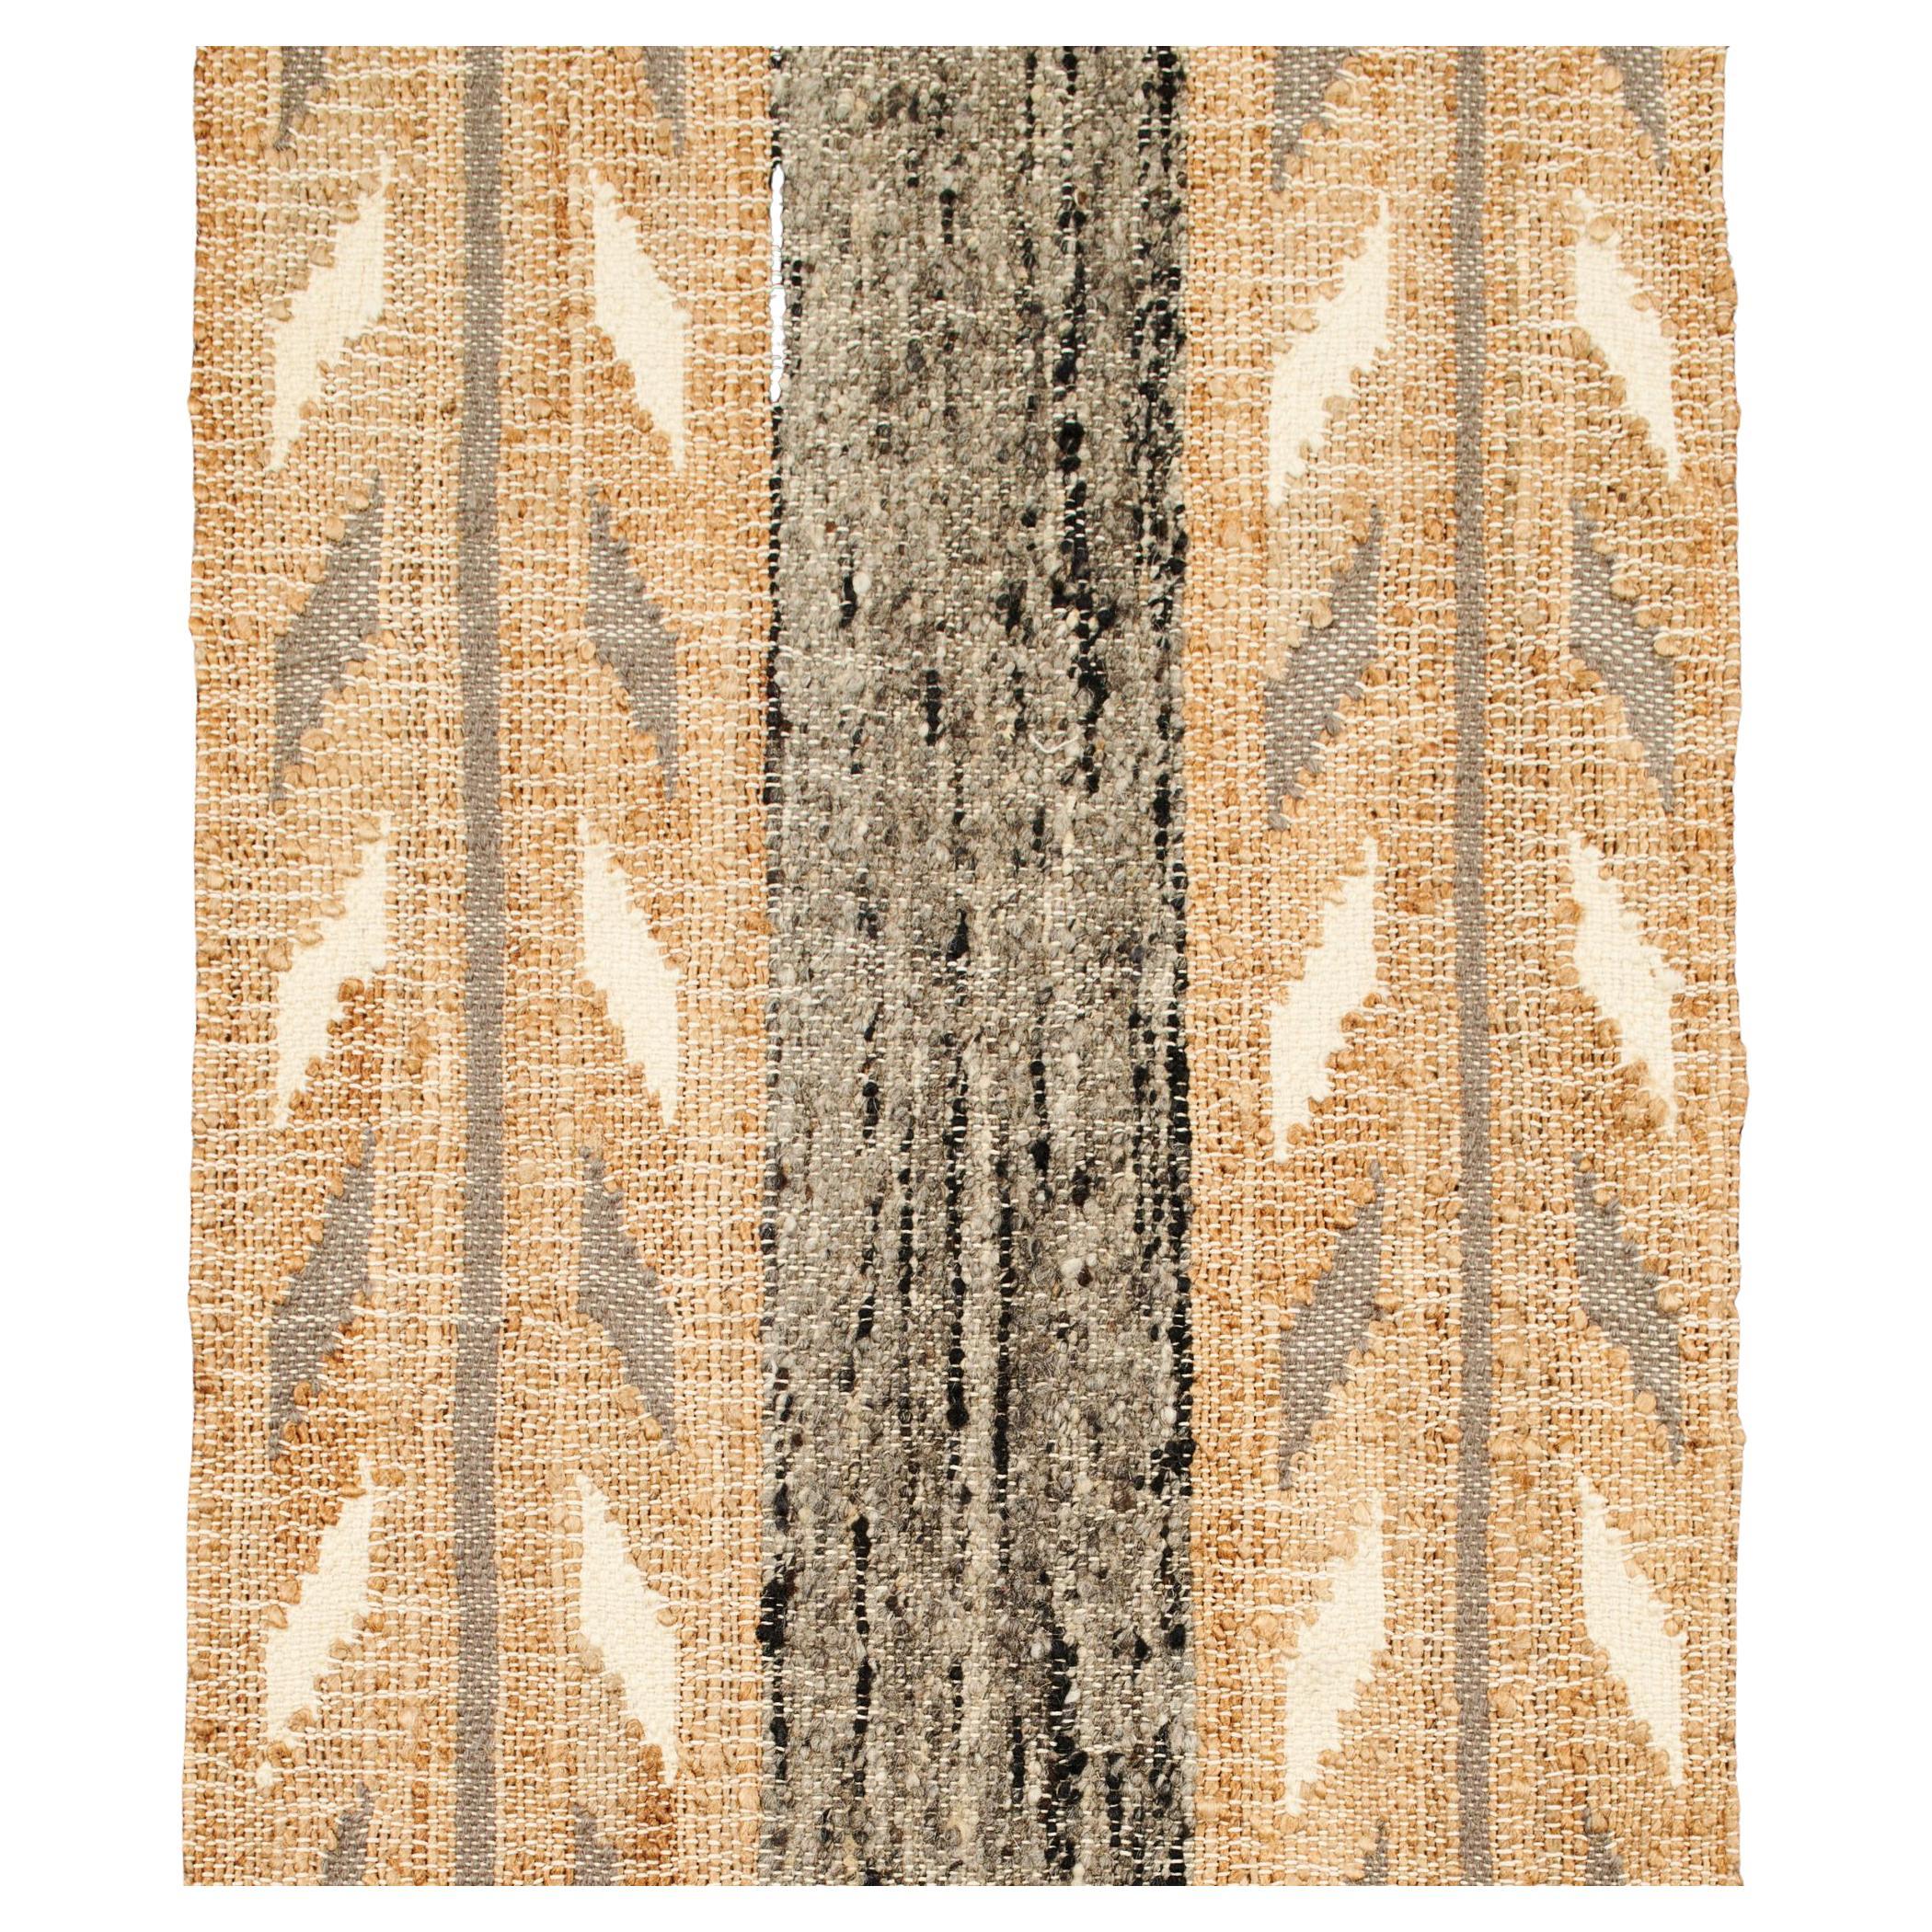 Uneven Arrows Handloom Rug in Natural Shades of Pure Wool, Jute, Cotton